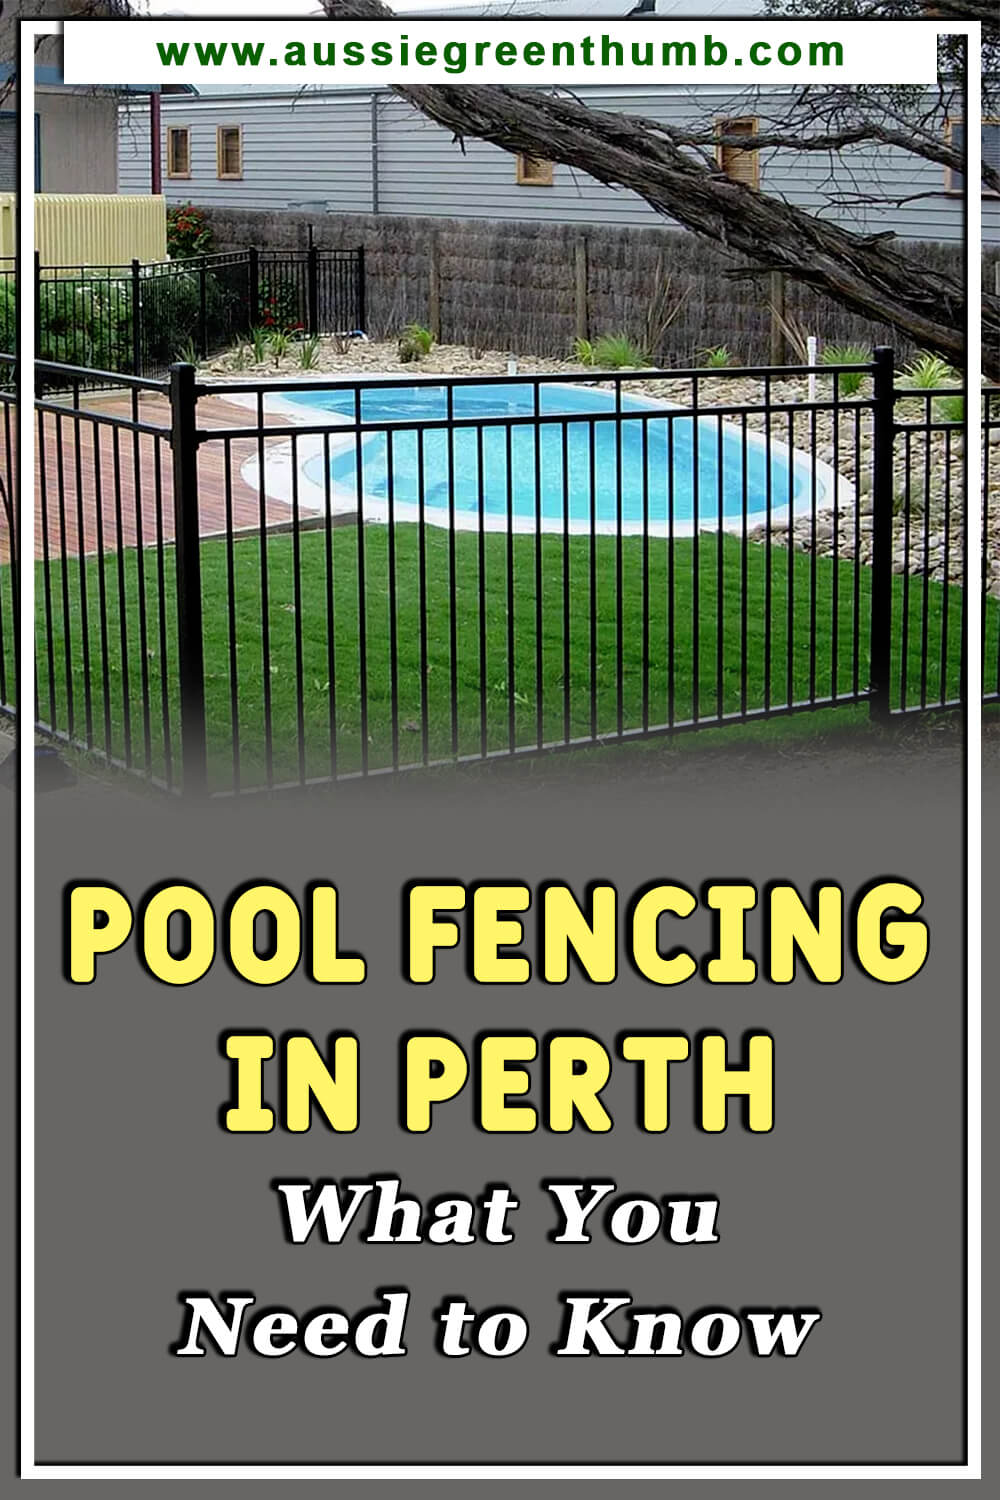 Pool Fencing in Perth What You Need to Know